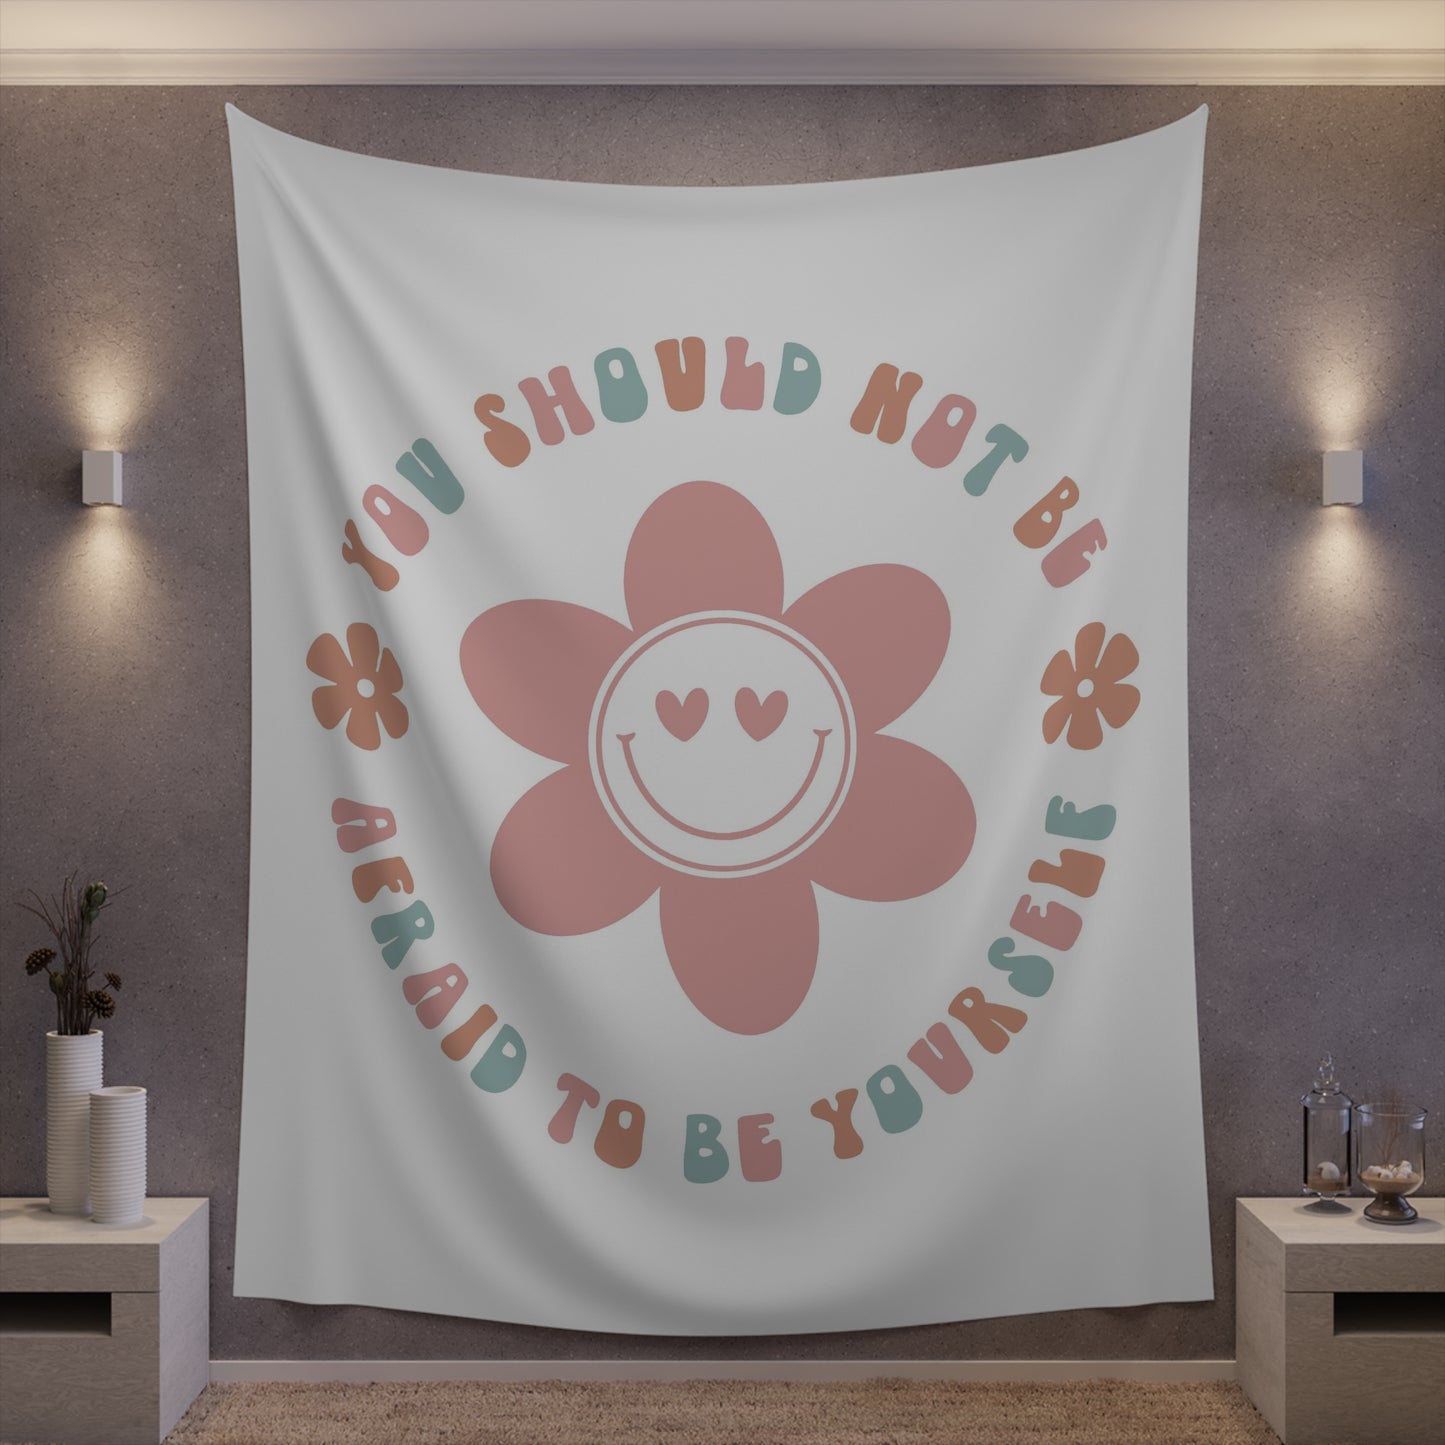 retro groovy you should not be afraid to be yourself Printed Wall Tapestry